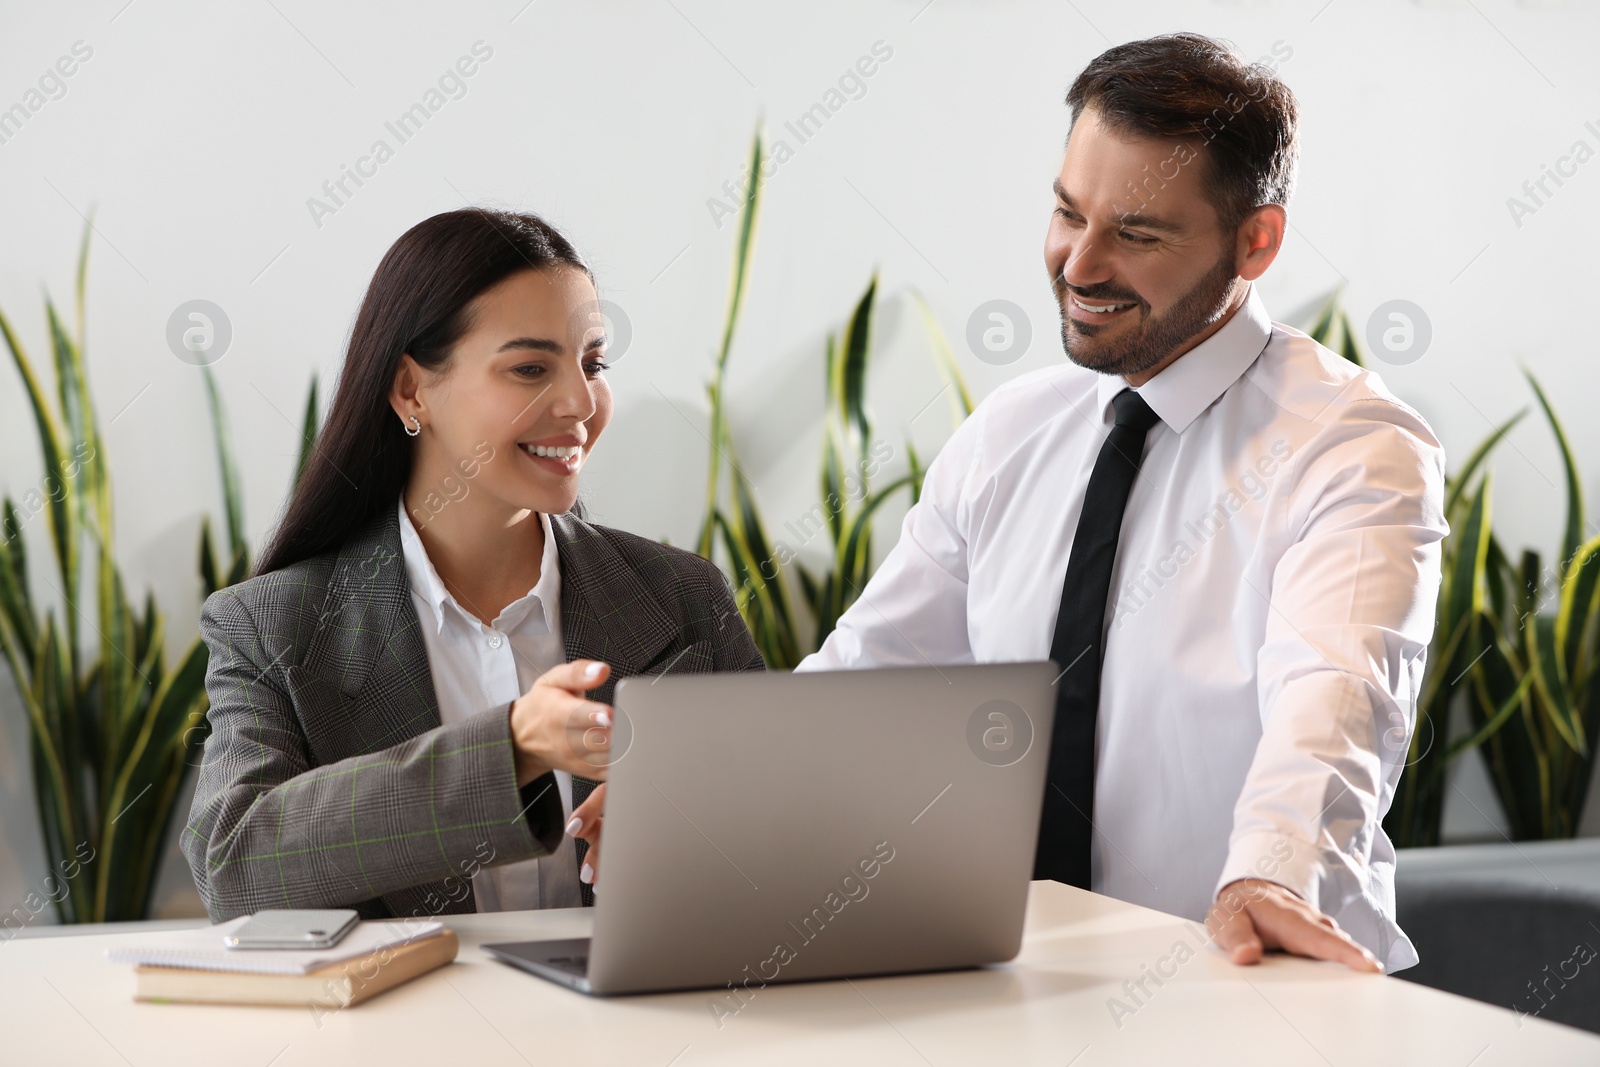 Photo of Colleagues working on laptop at desk in office